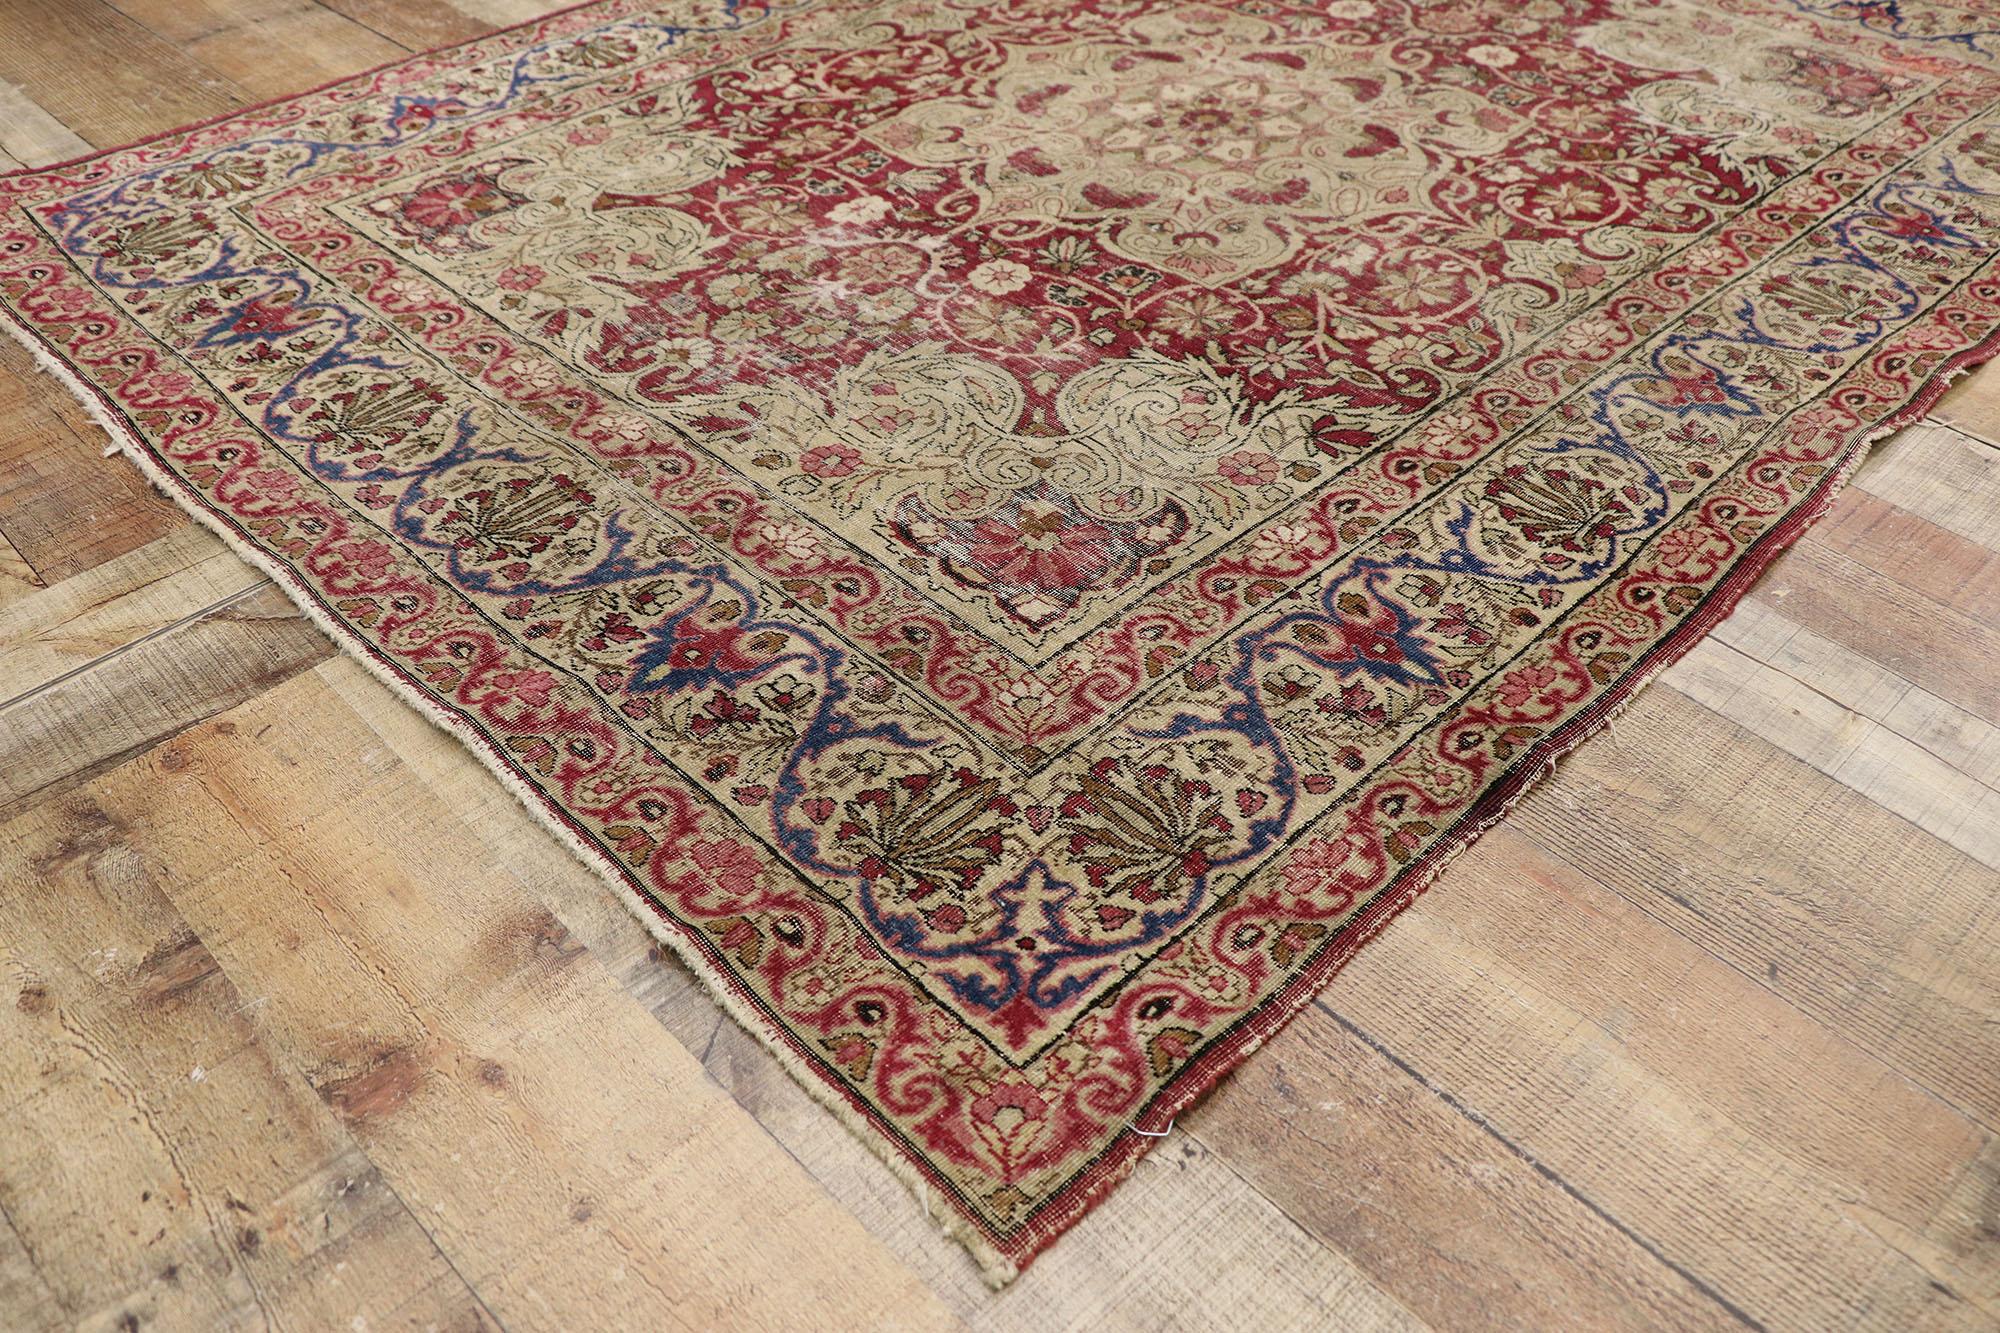 20th Century Distressed Antique Persian Kerman Rug with Rustic Old World Victorian Style For Sale